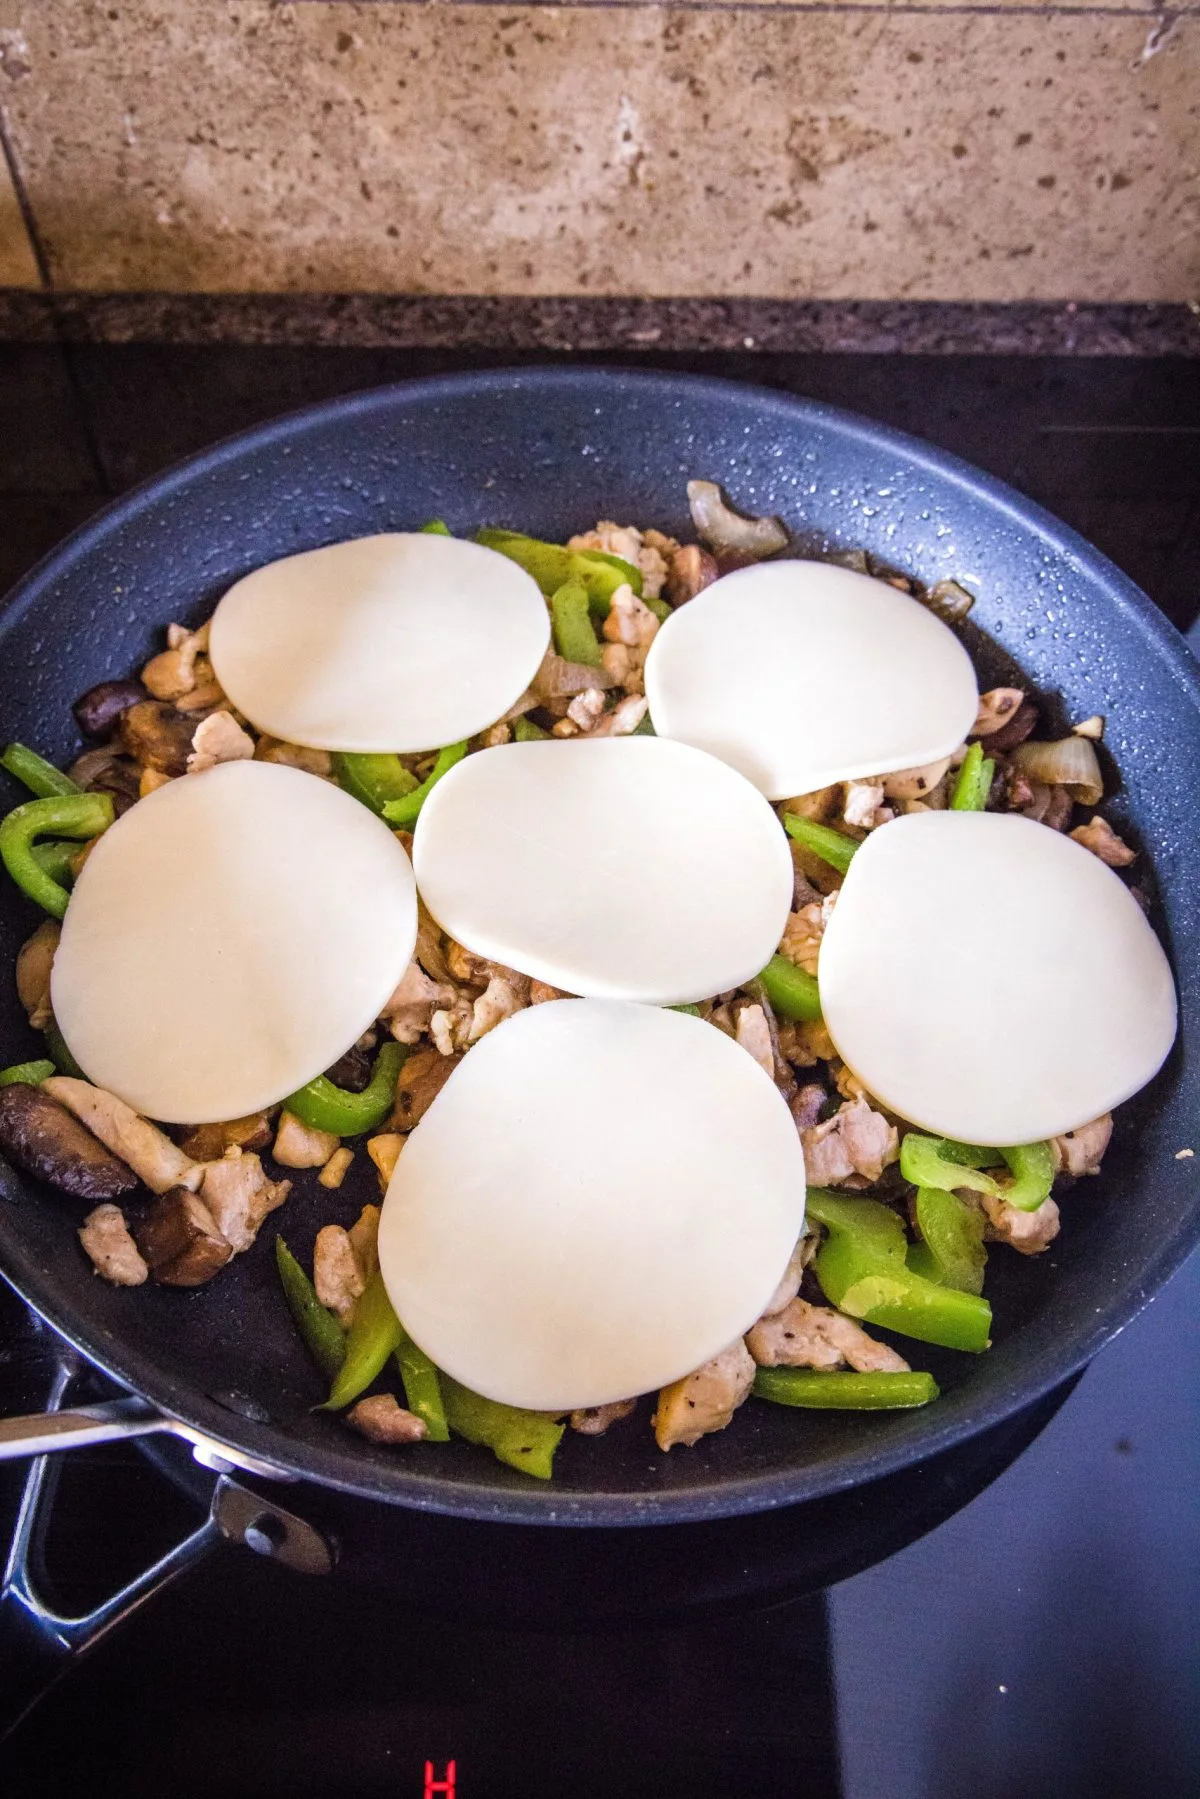 Slices of provolone cheese on top of onions, peppers, mushrooms, and chicken in a skillet